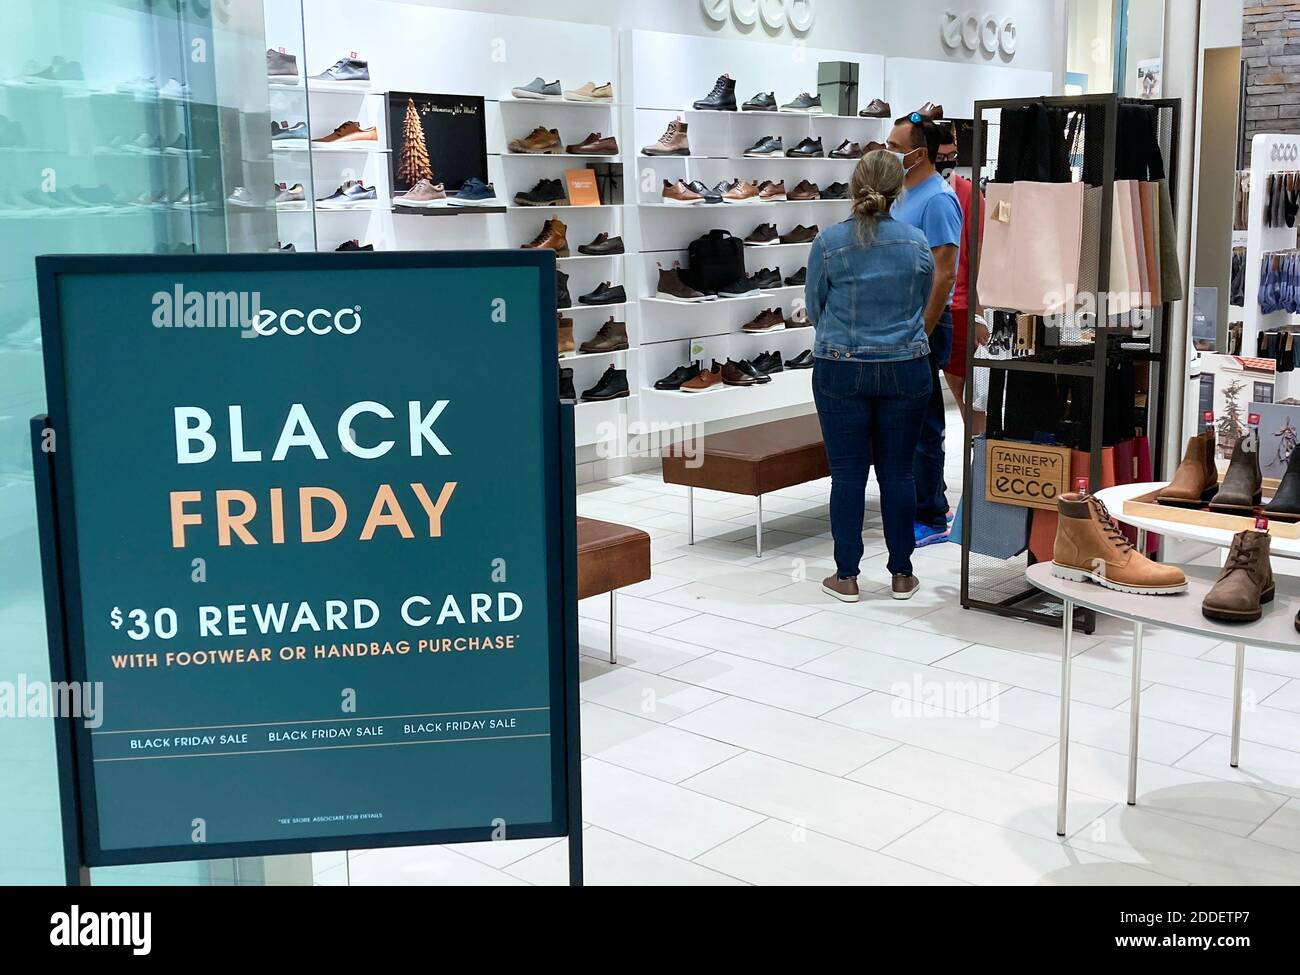 Orlando, United States. 24th Nov, 2020. A shopper wearing a face mask walks  past a Black Friday sale sign in a store at The Mall at Millenia as  merchants prepare for one